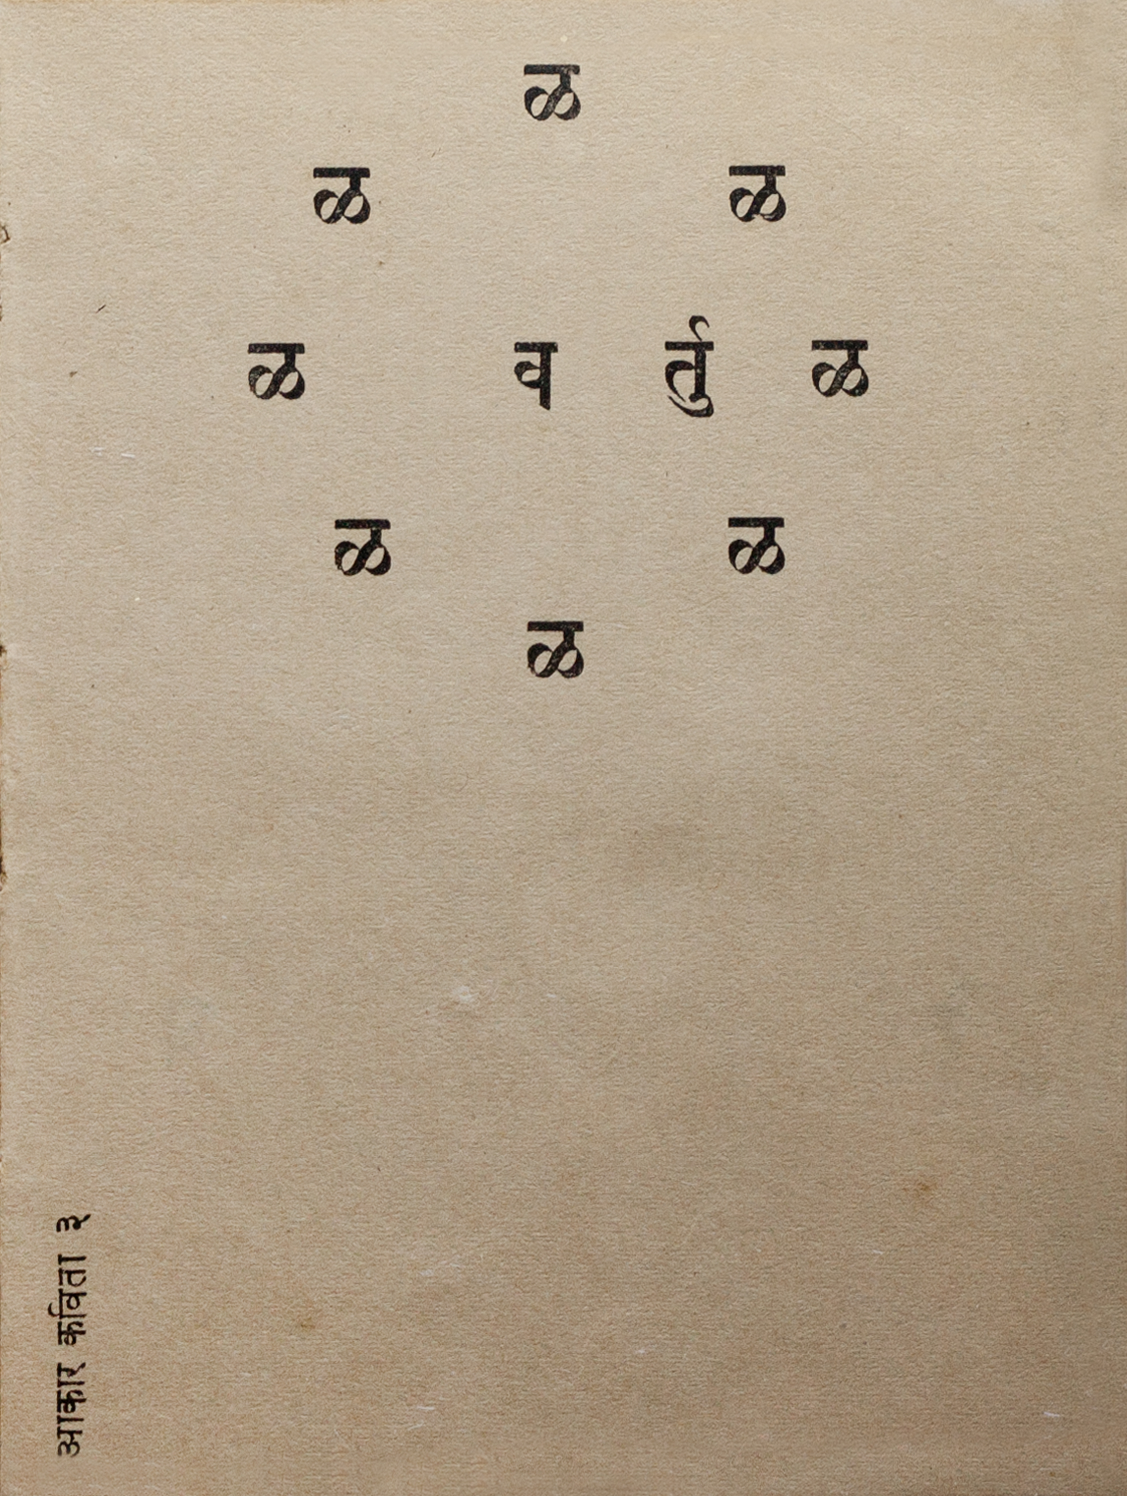 आकार कविता ३. Concrete poetry No.3 in Marathi spelling out the word for circle by R. K. Joshi. Rava No. 10, November 1972. Image courtesy Shrujana N. Shridhar.